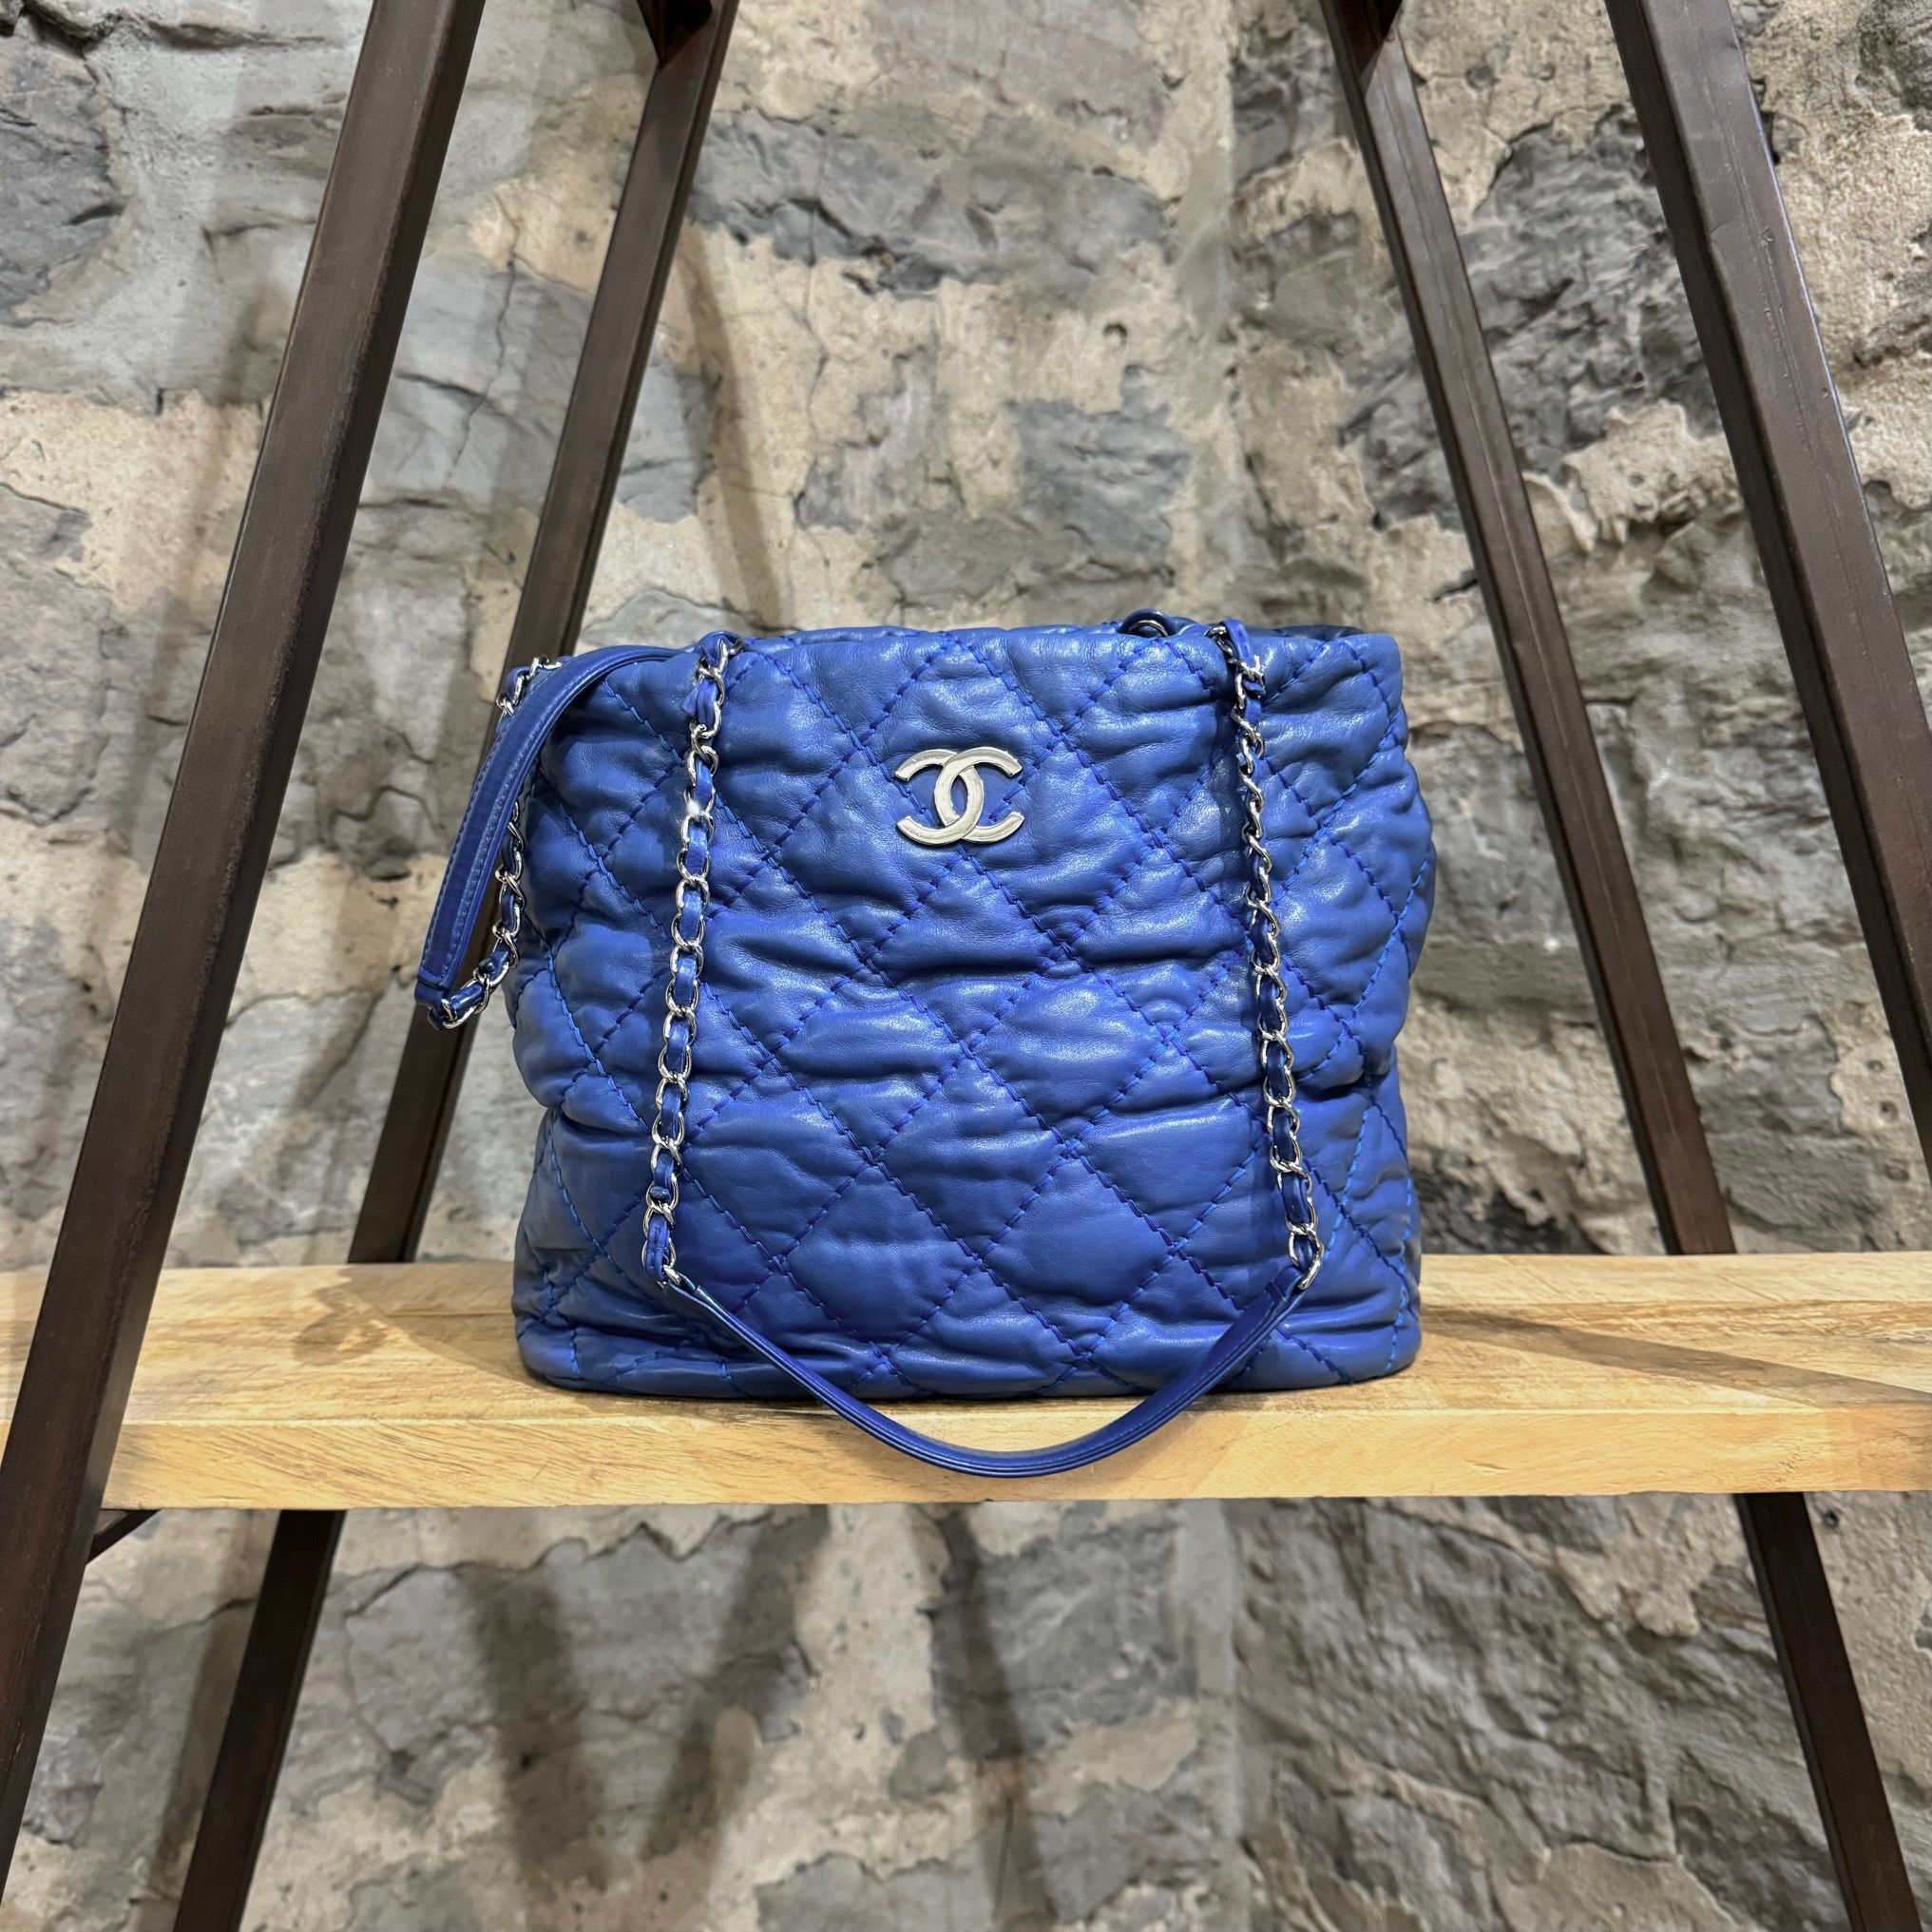 Chanel Top Handle Tote Bags